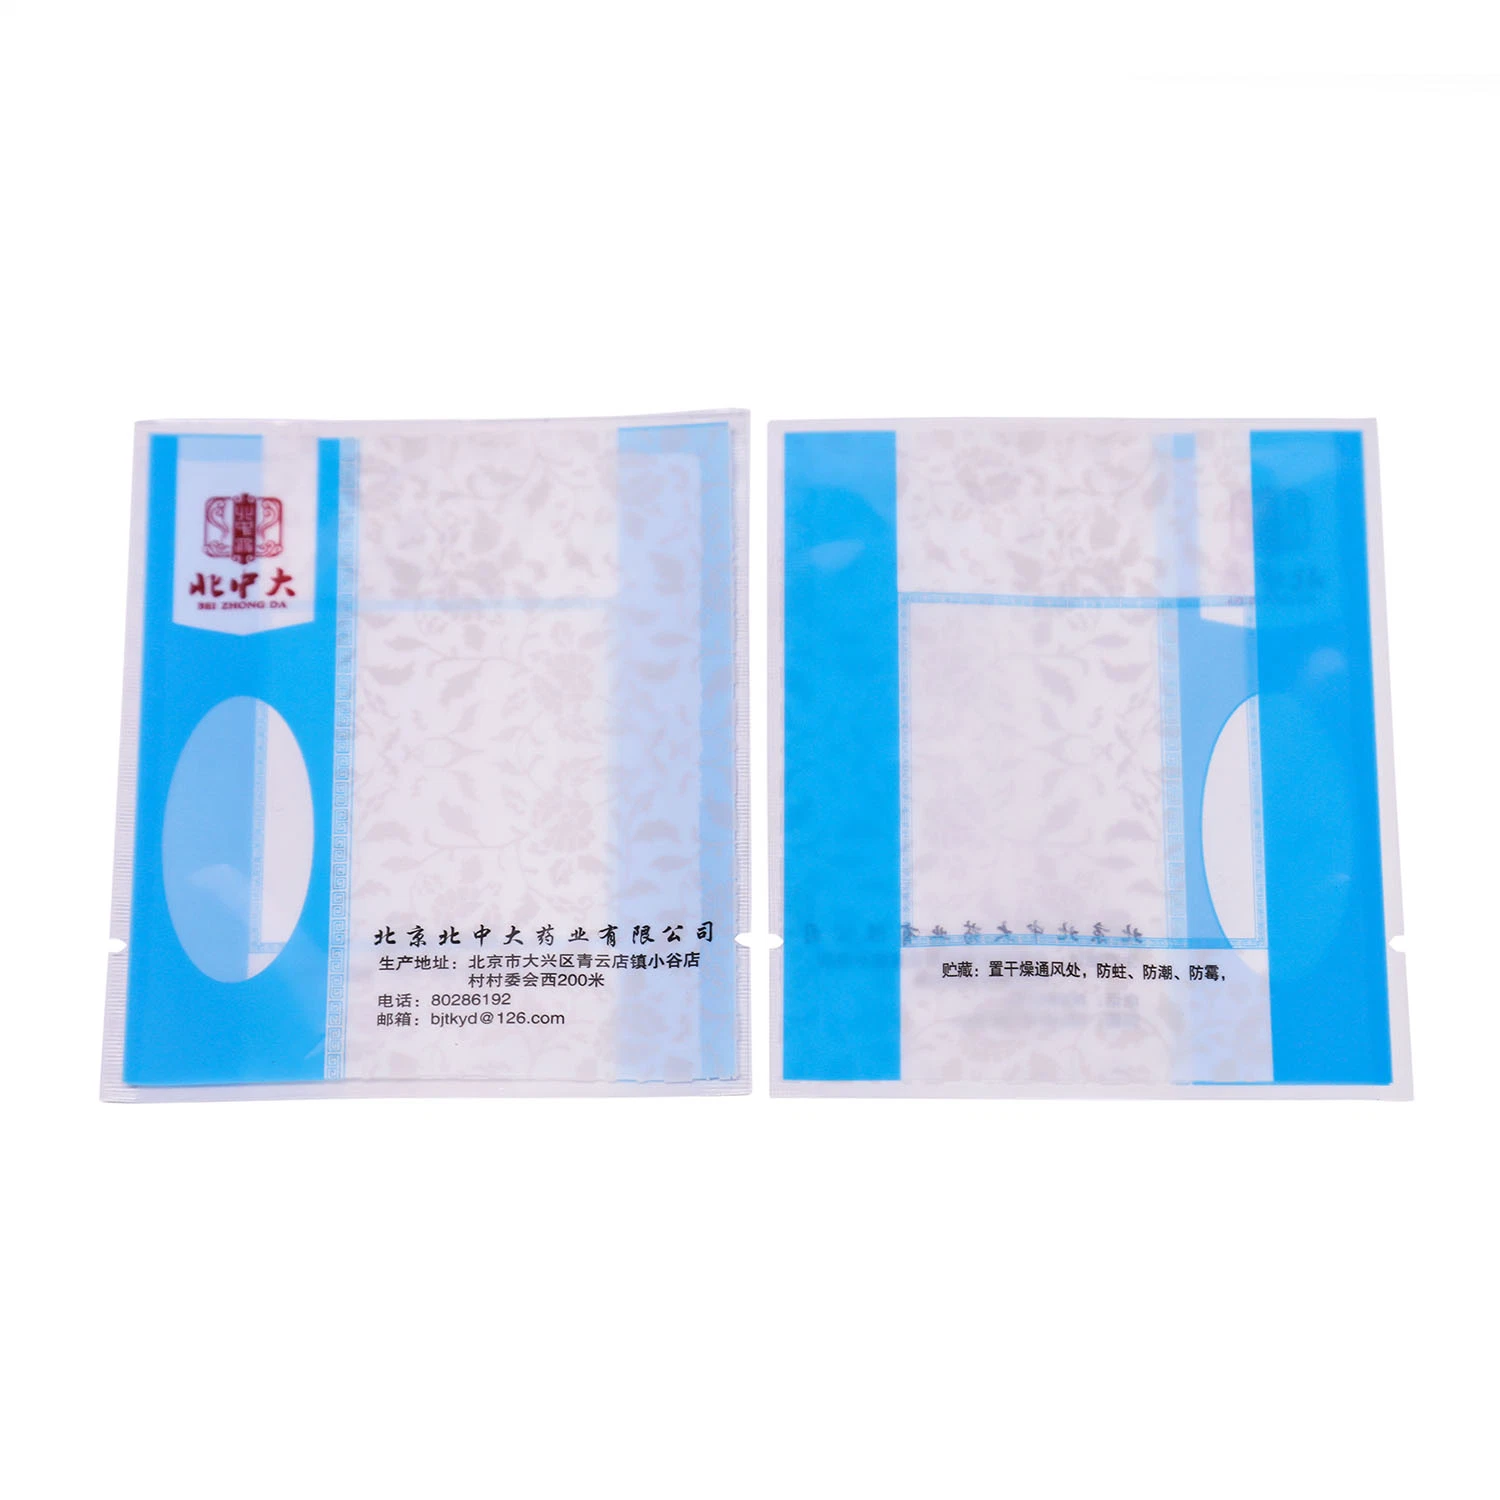 Kinds of Customized Shape Printing Sealing Colorful Aluminium Plastic Pharmaceutical Pouch Food Shock Resistant Vacuum Packaging